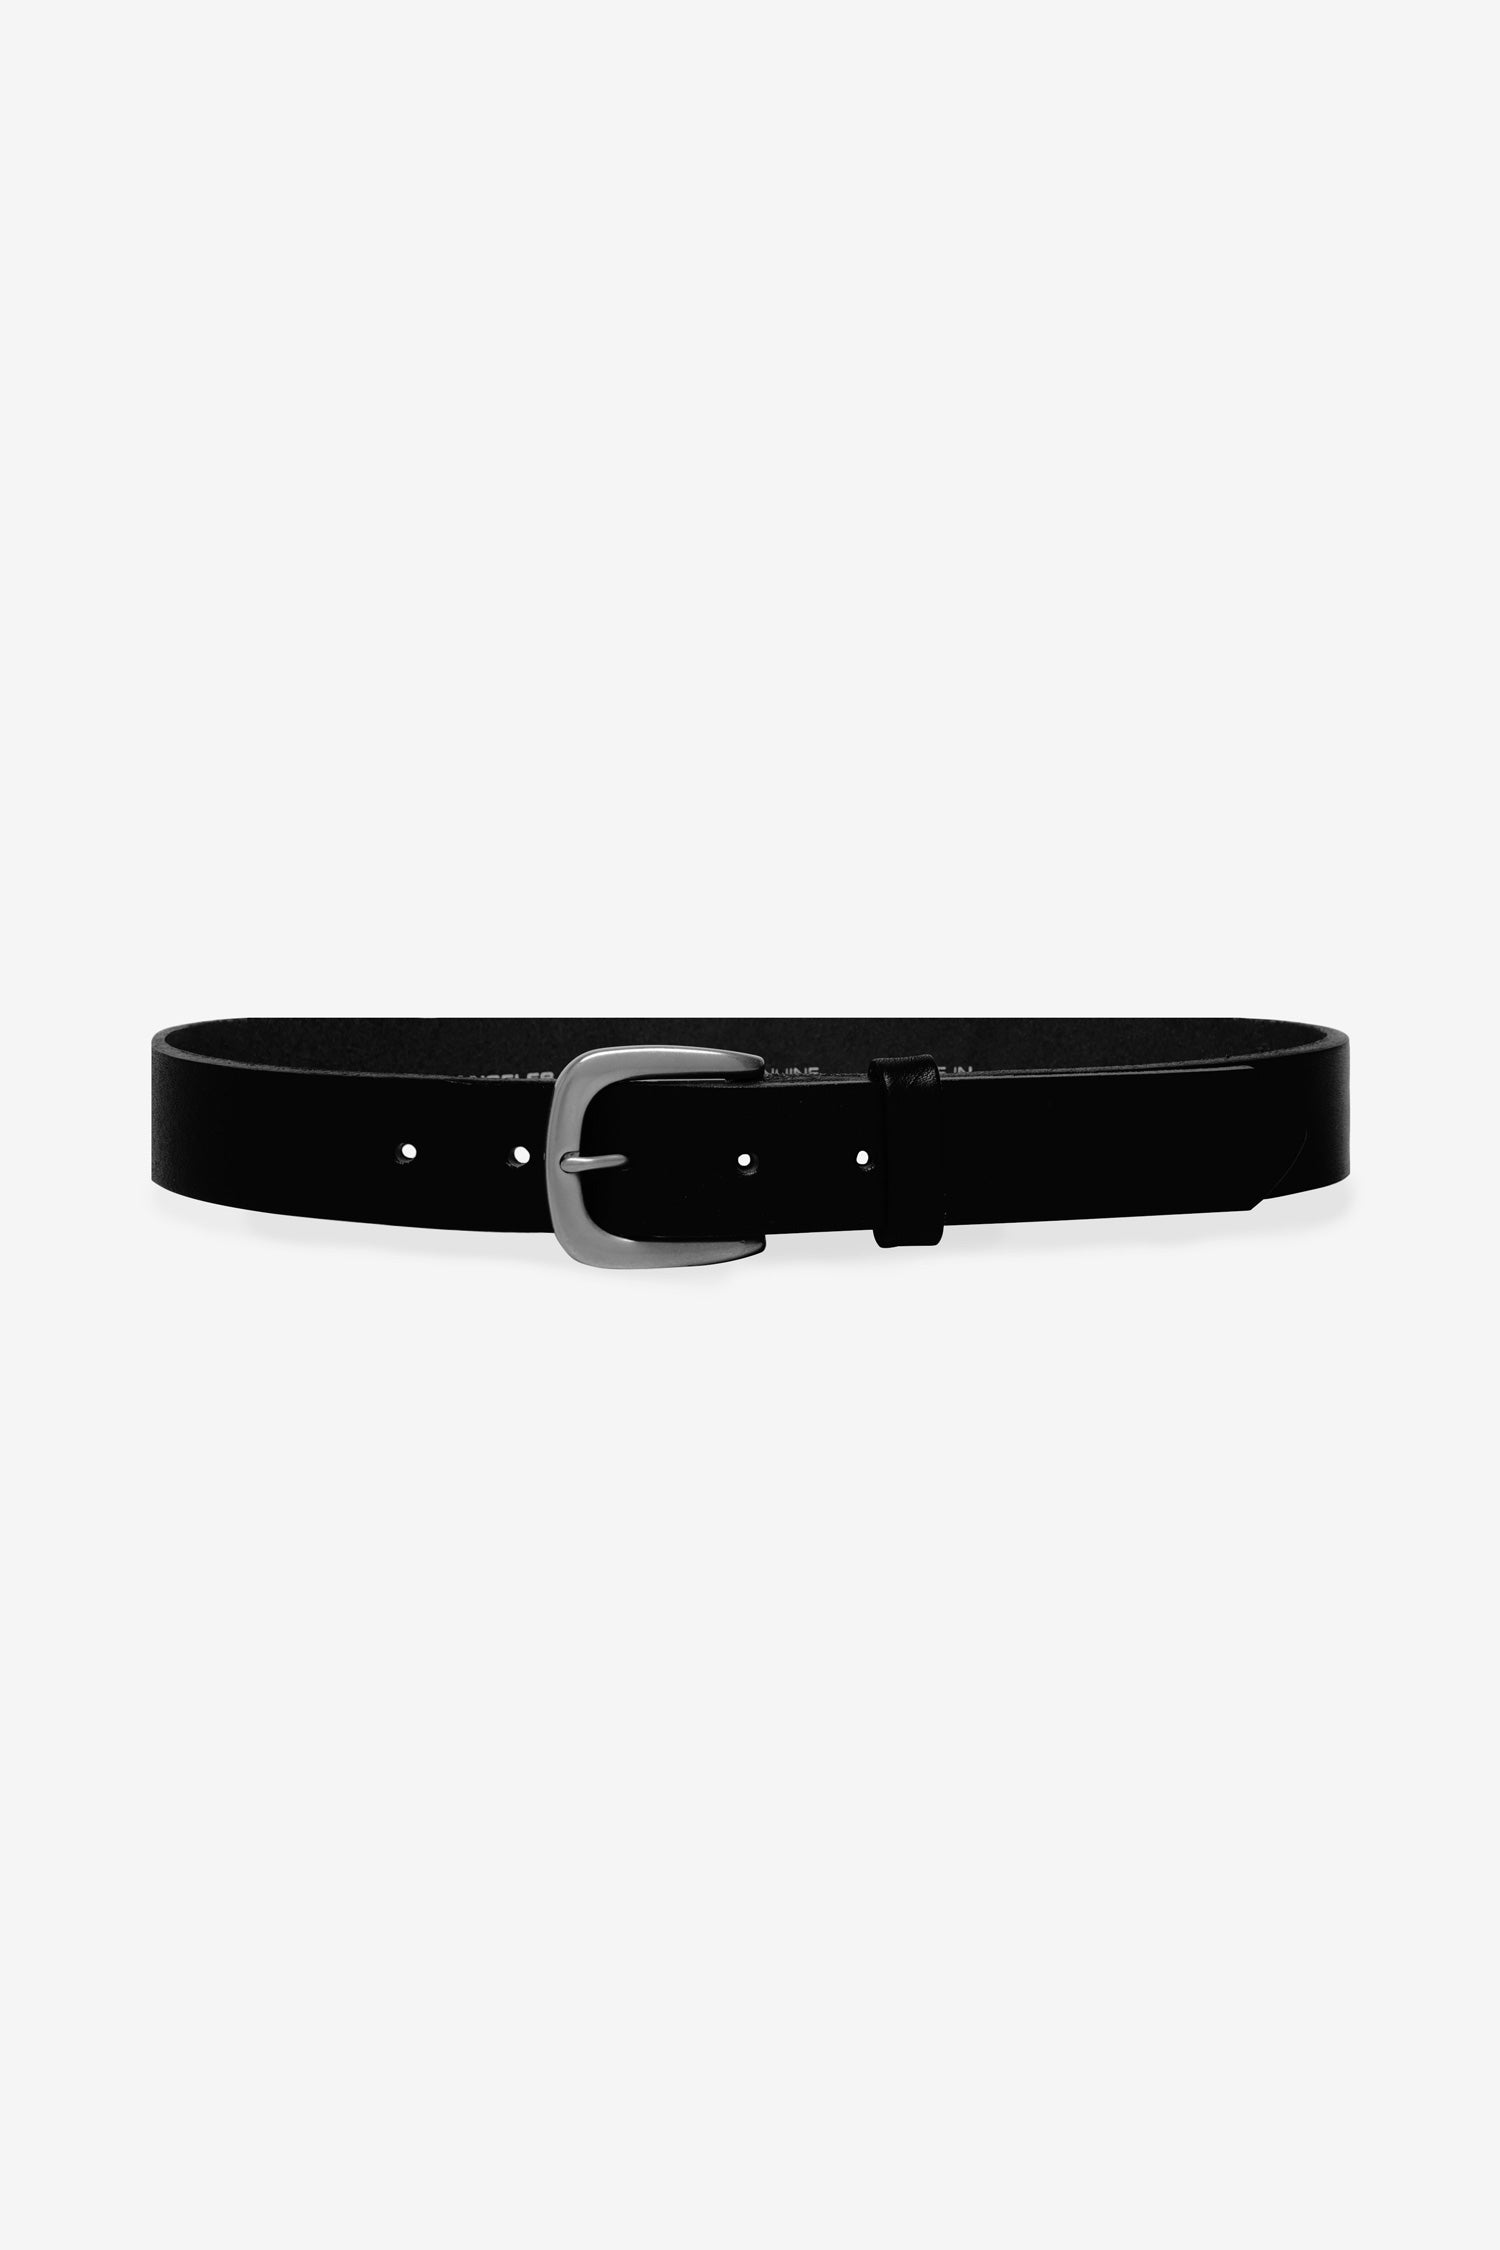 RSALBT05 - Unisex Rounded Square Buckle Leather Belt – Los Angeles